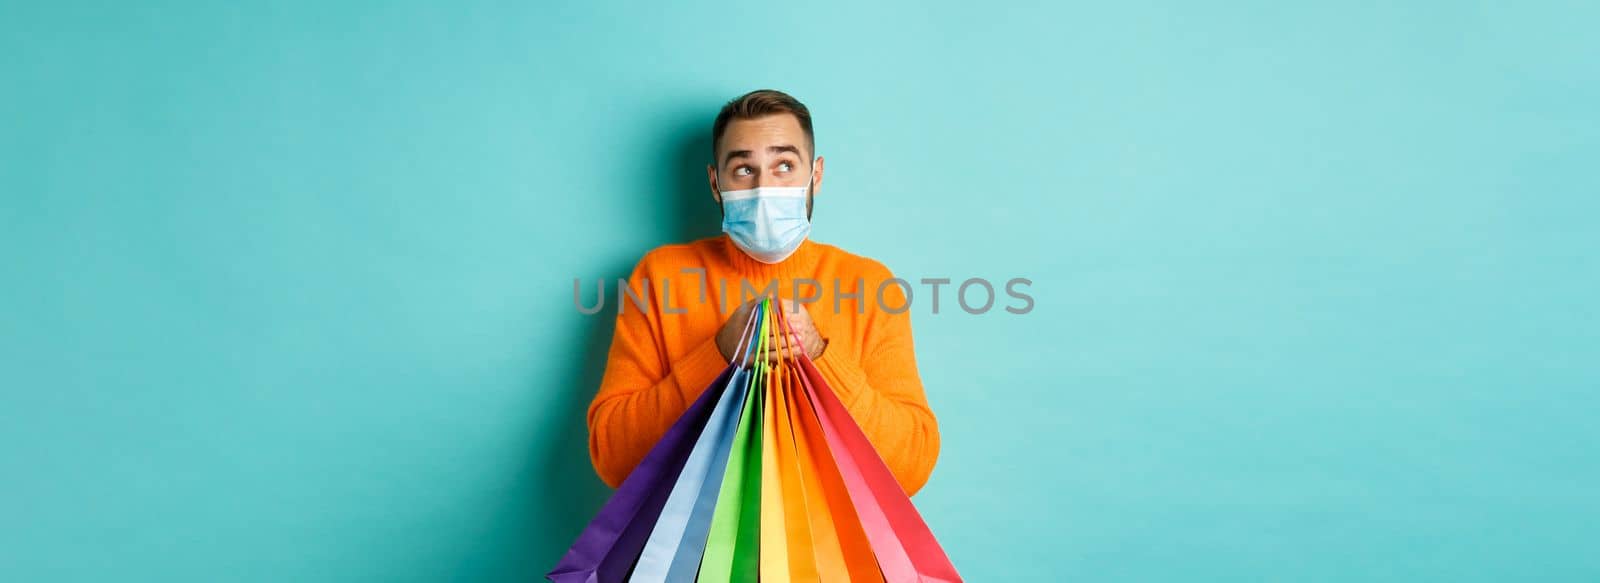 Covid-19, pandemic and lifestyle concept. Man thinking, wearing face mask, holding shopping bags, imaging something, standing over turquoise background by Benzoix